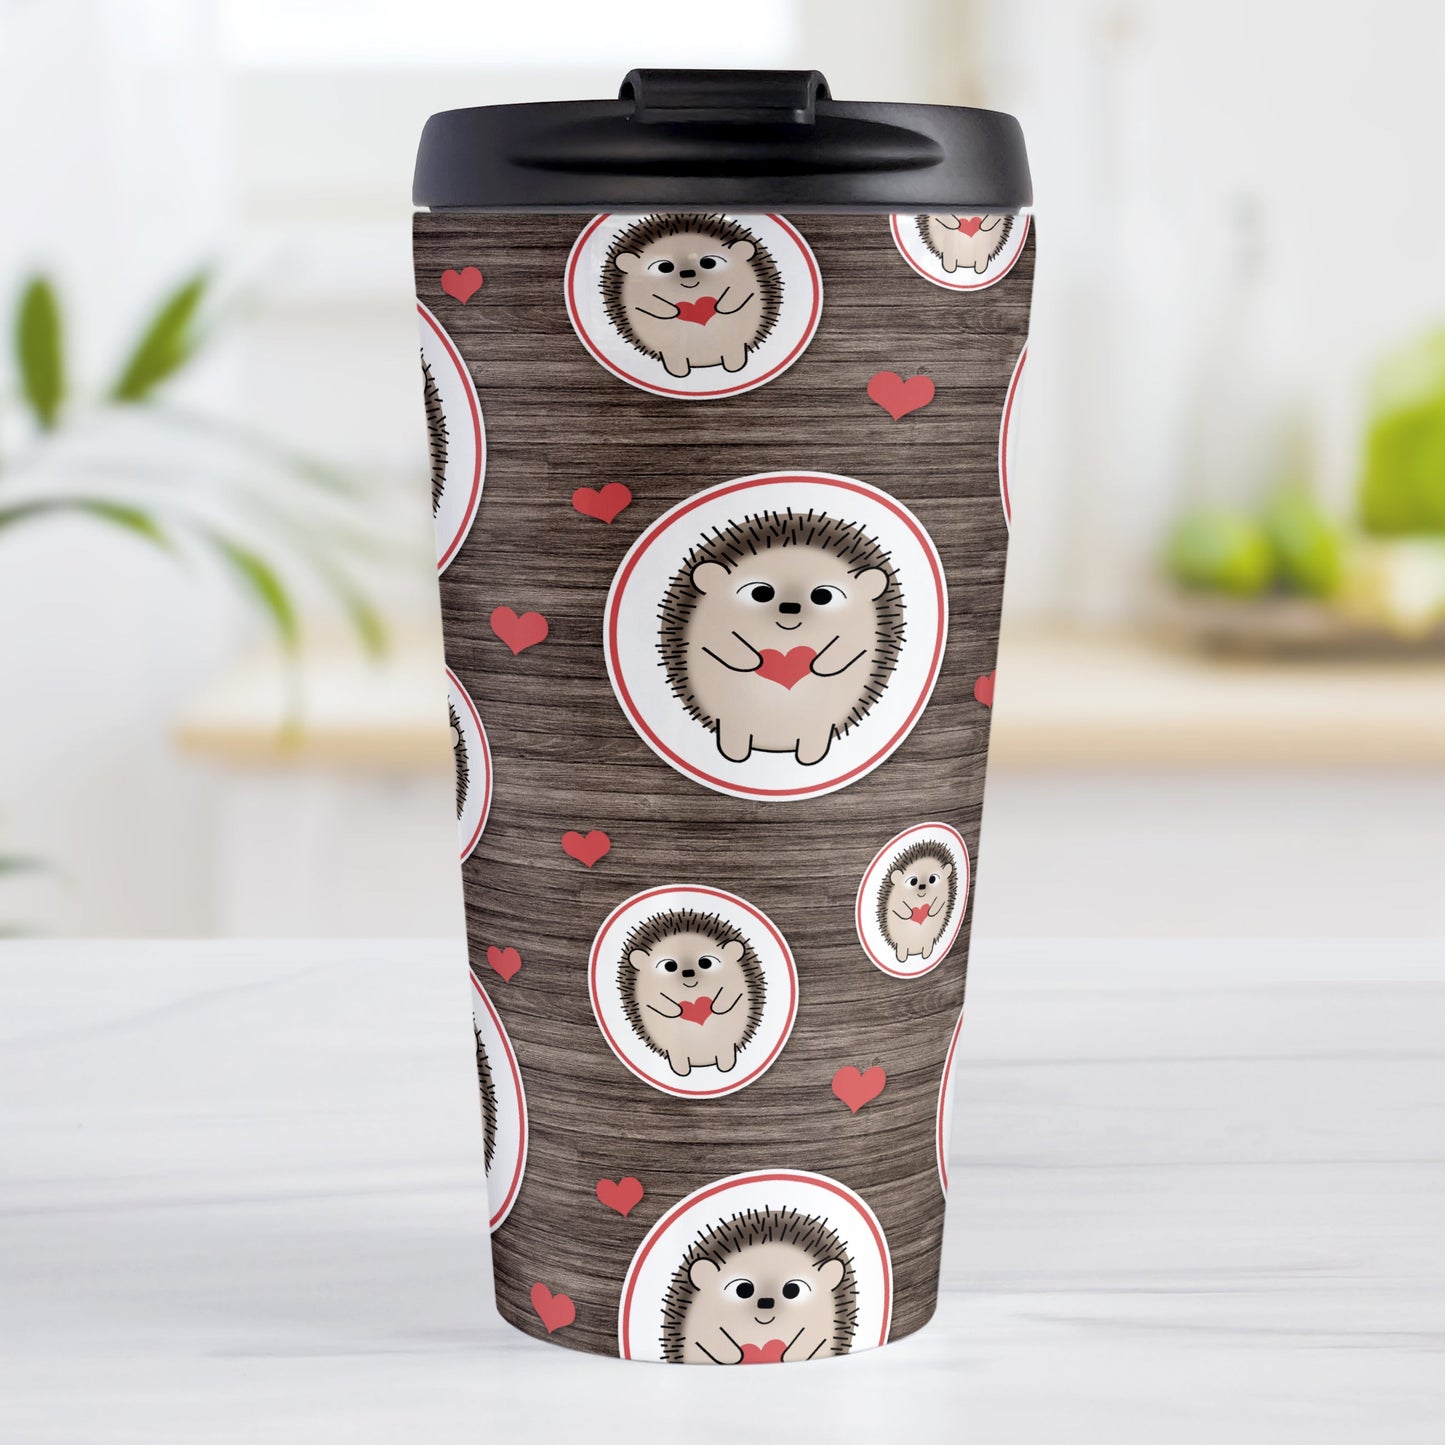 Rustic Wood Red Heart Hedgehog Travel Mug (15oz, stainless steel insulated) at Amy's Coffee Mugs